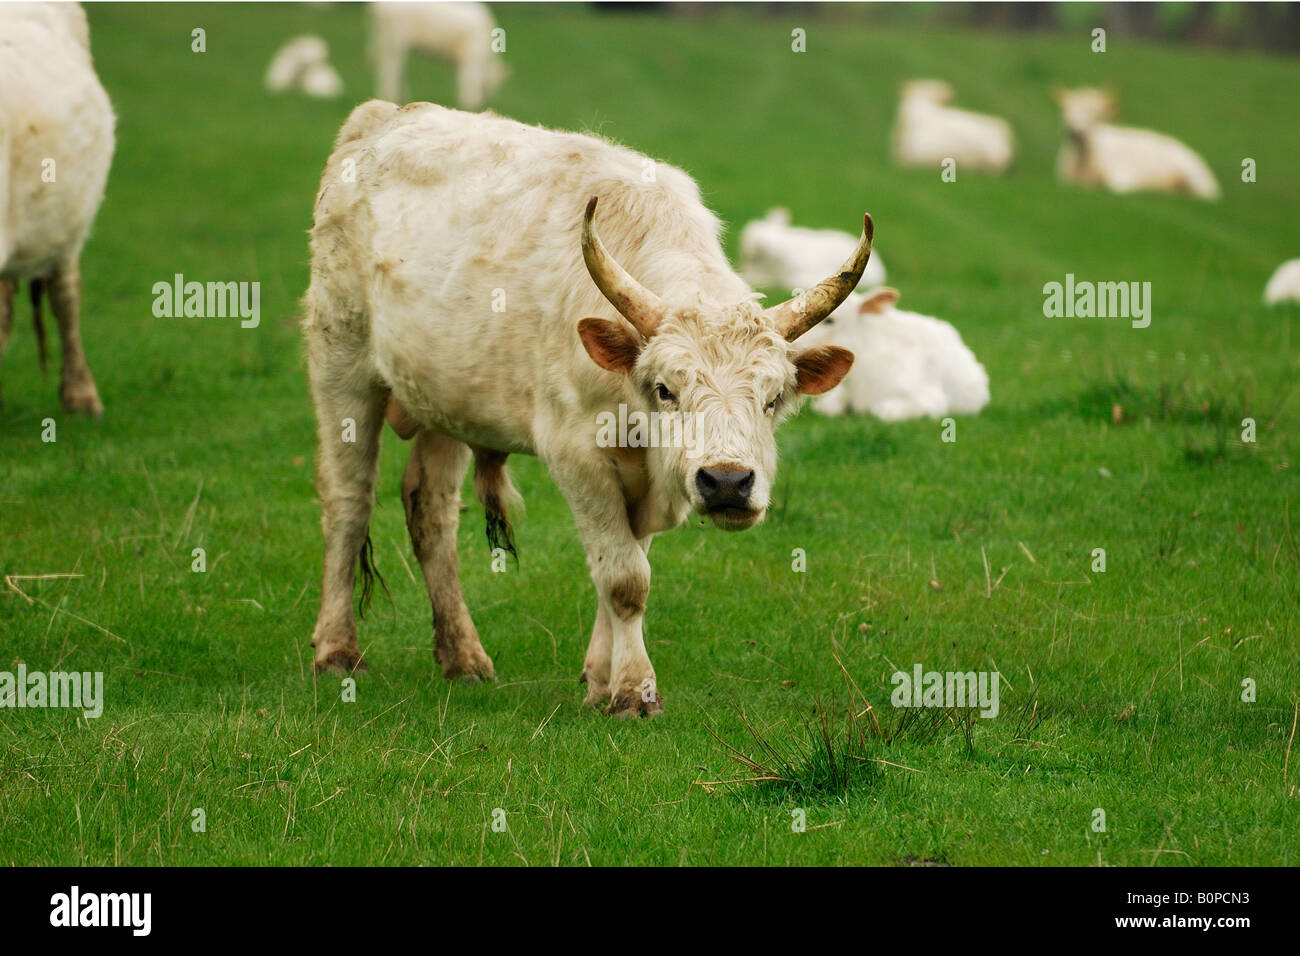 A bull of the Wild Cattle of Chillingham Park, Northumberland, United Kingdom Stock Photo